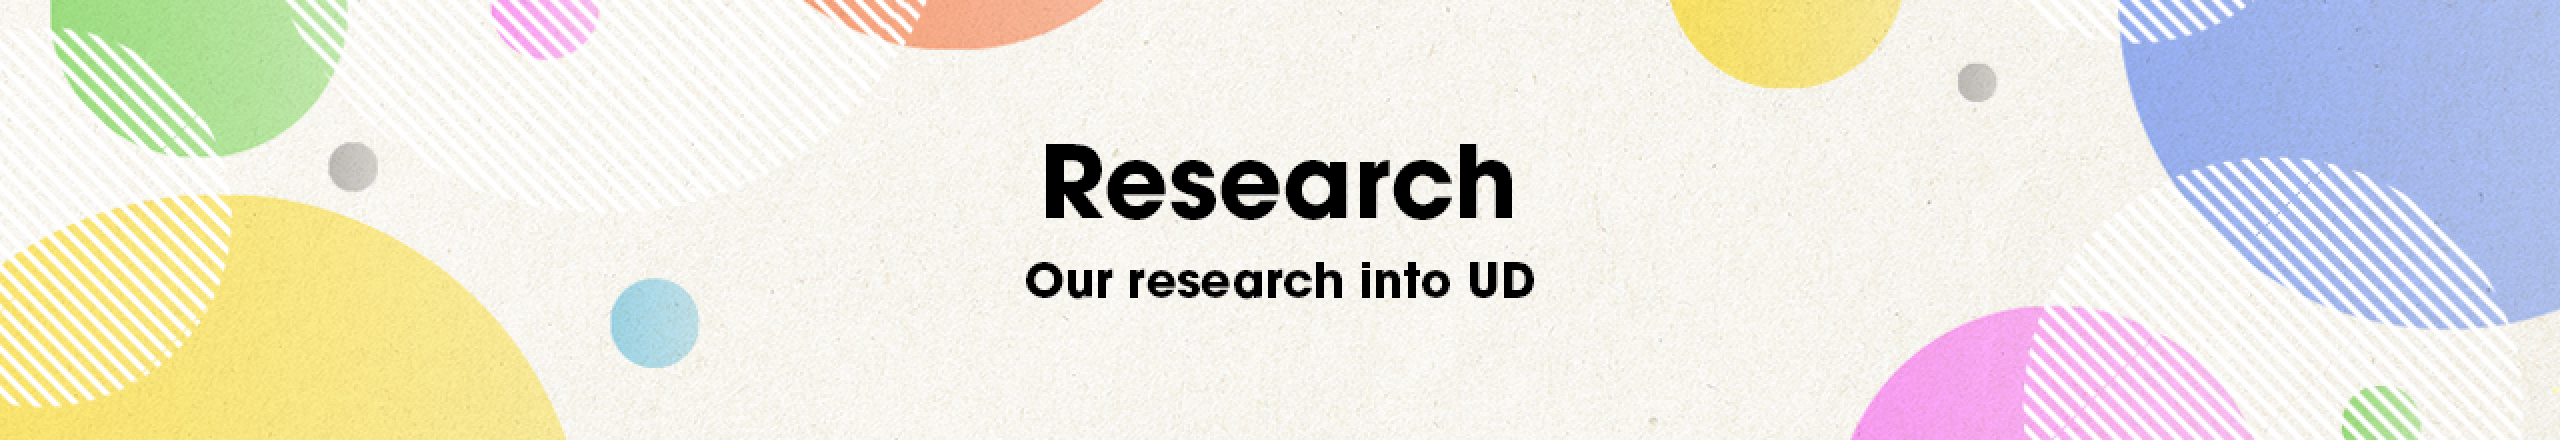 Research Our research into UD